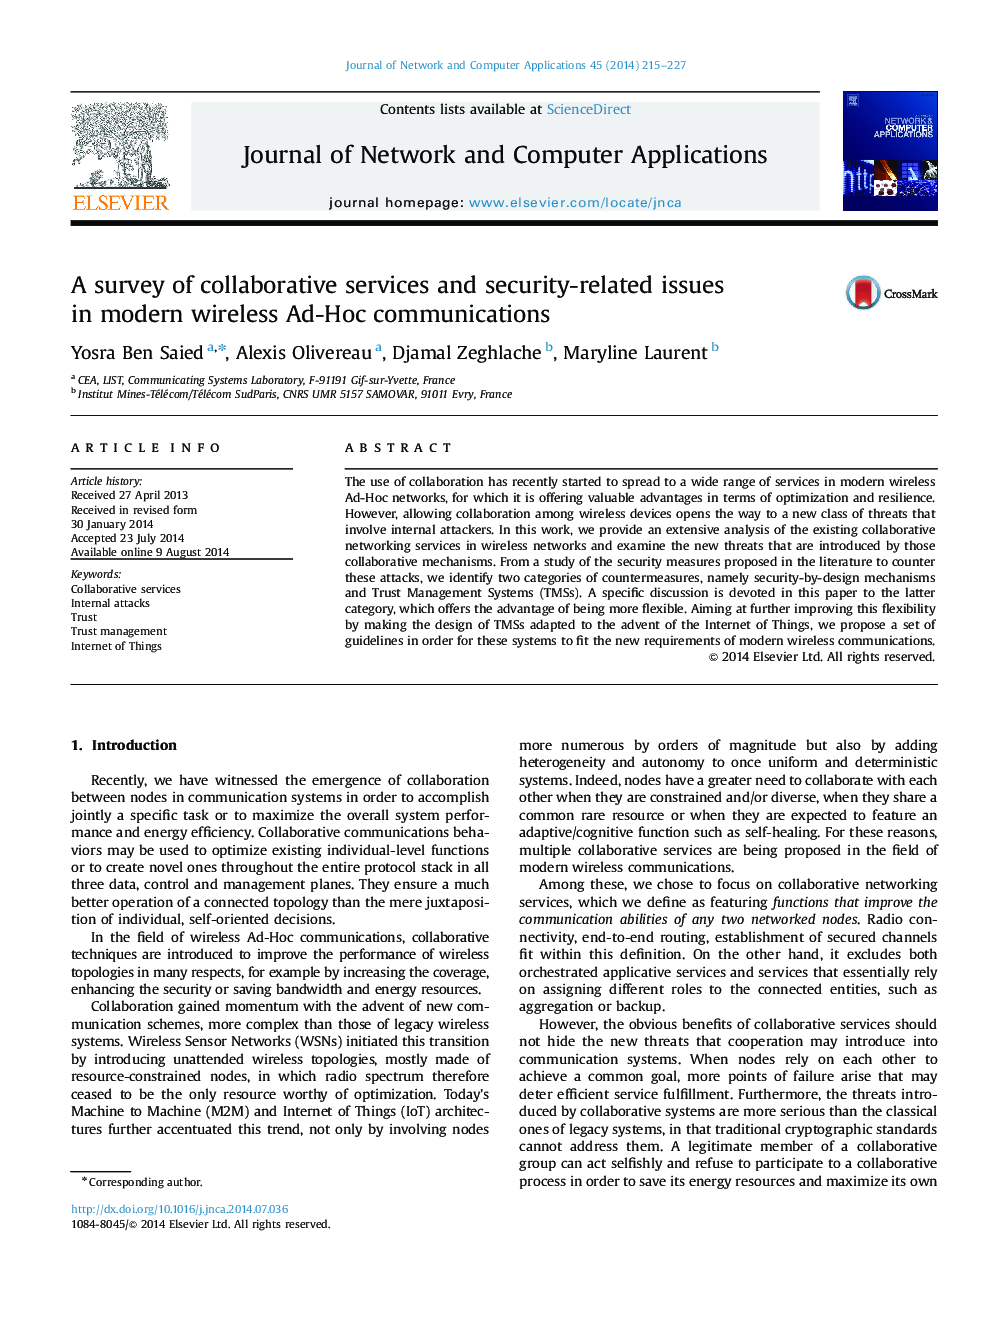 A survey of collaborative services and security-related issues in modern wireless Ad-Hoc communications